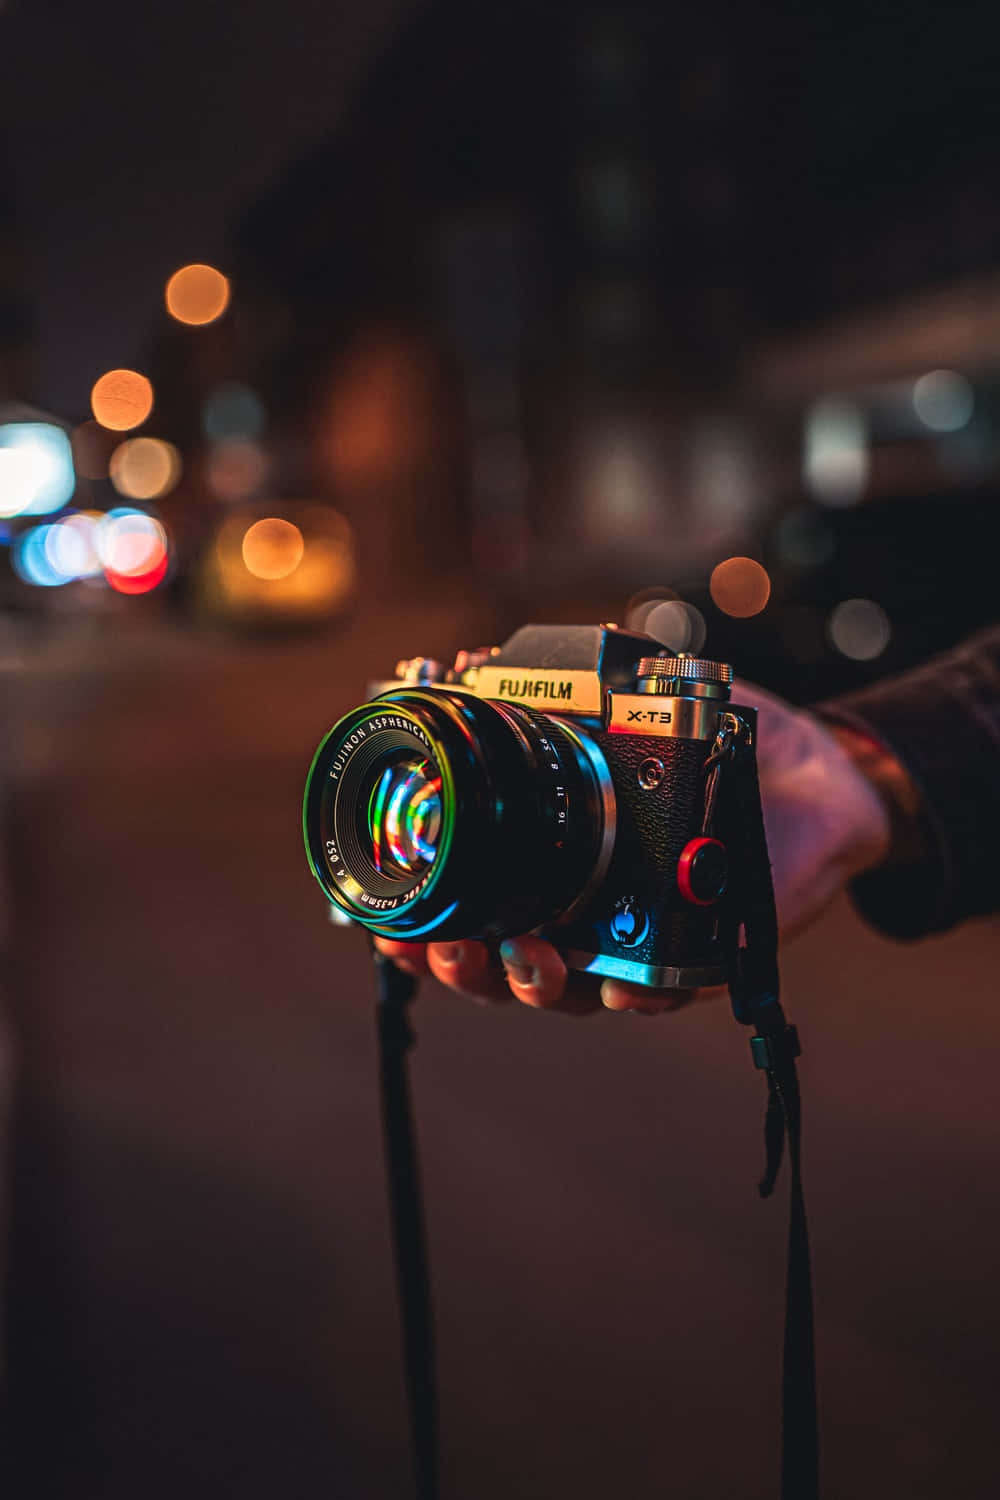 Vibrant Photography Passion: A Camera On A Colorful Street